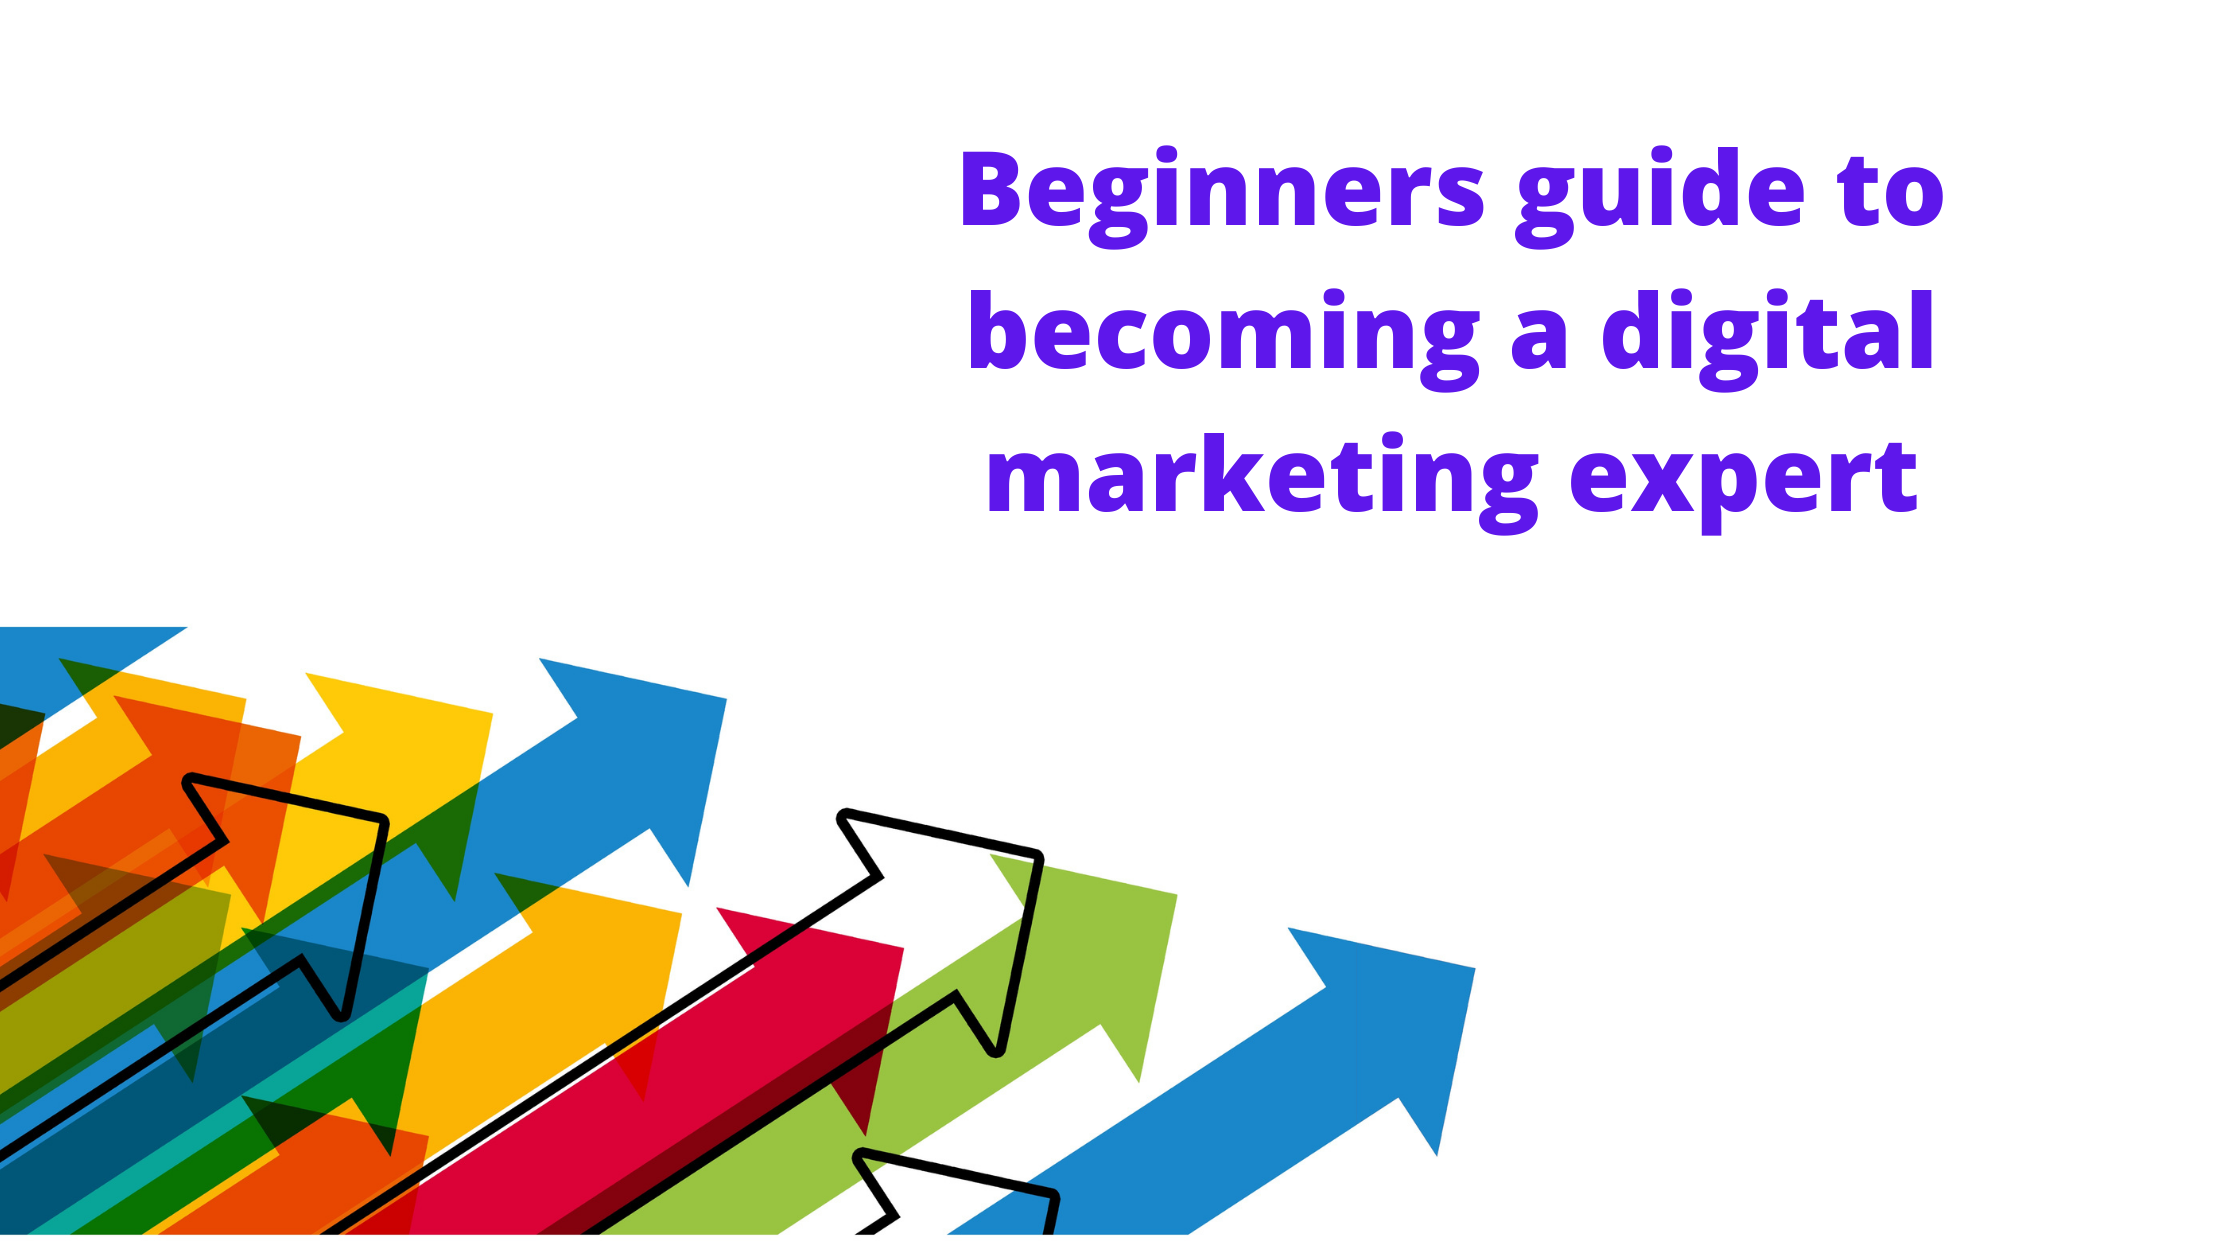 A Beginners guide to becoming a digital marketing expert